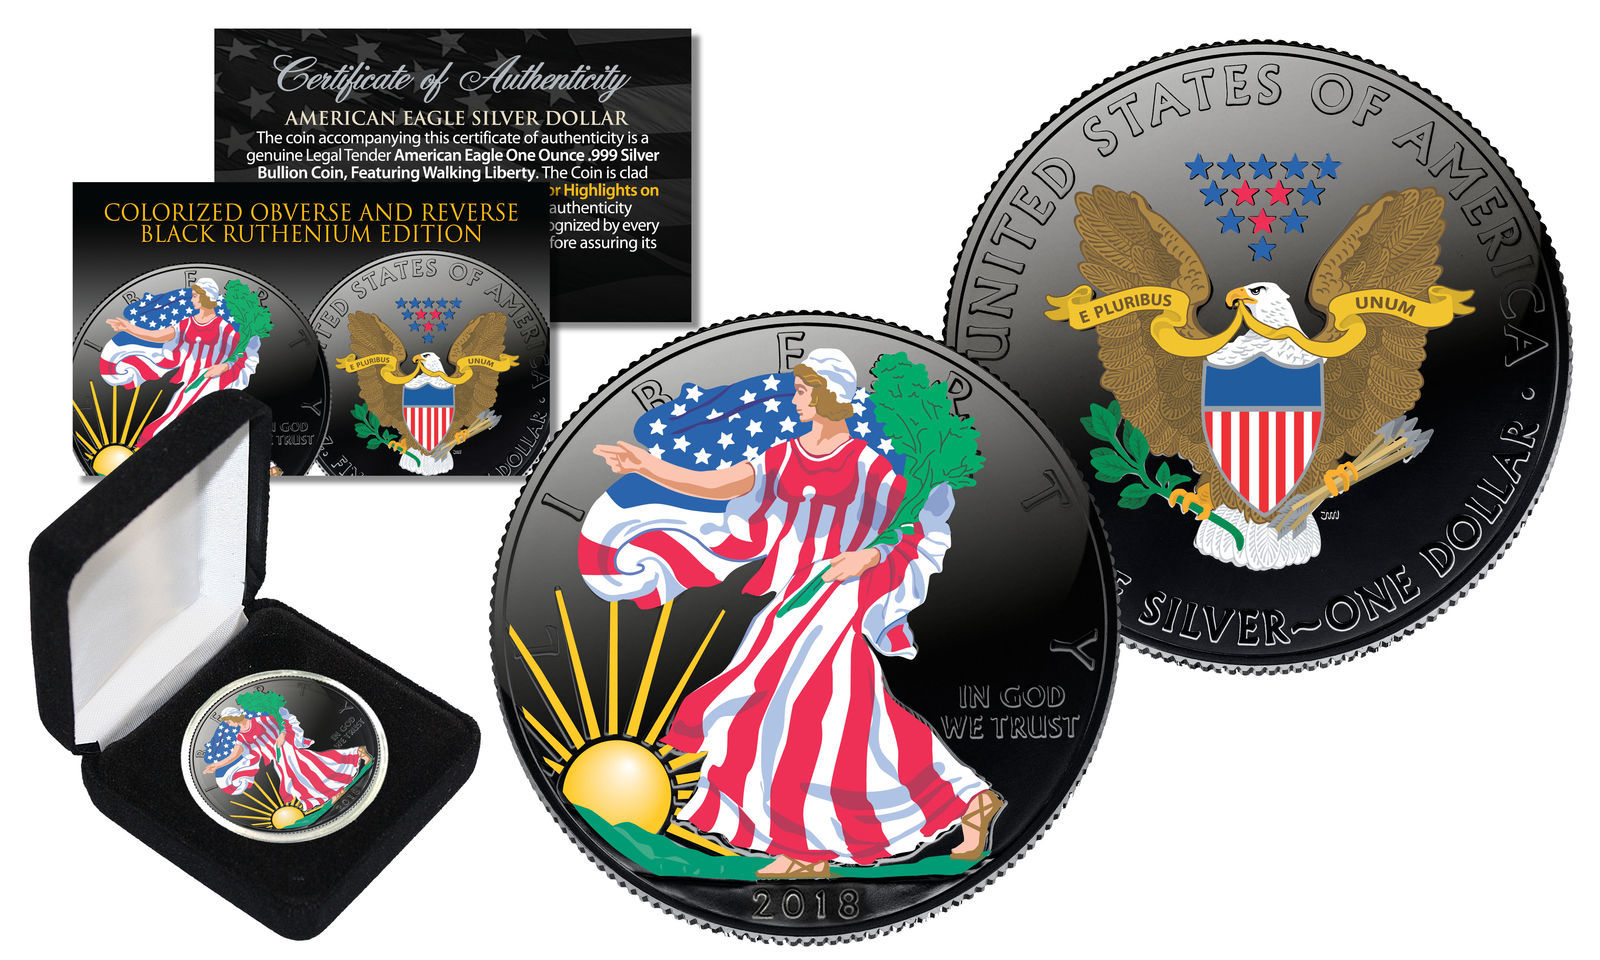 BLACK RUTHENIUM & COLORIZED 2-Sided 1 Troy Oz .999 2021 Silver Eagle Coin w/Box - $74.76